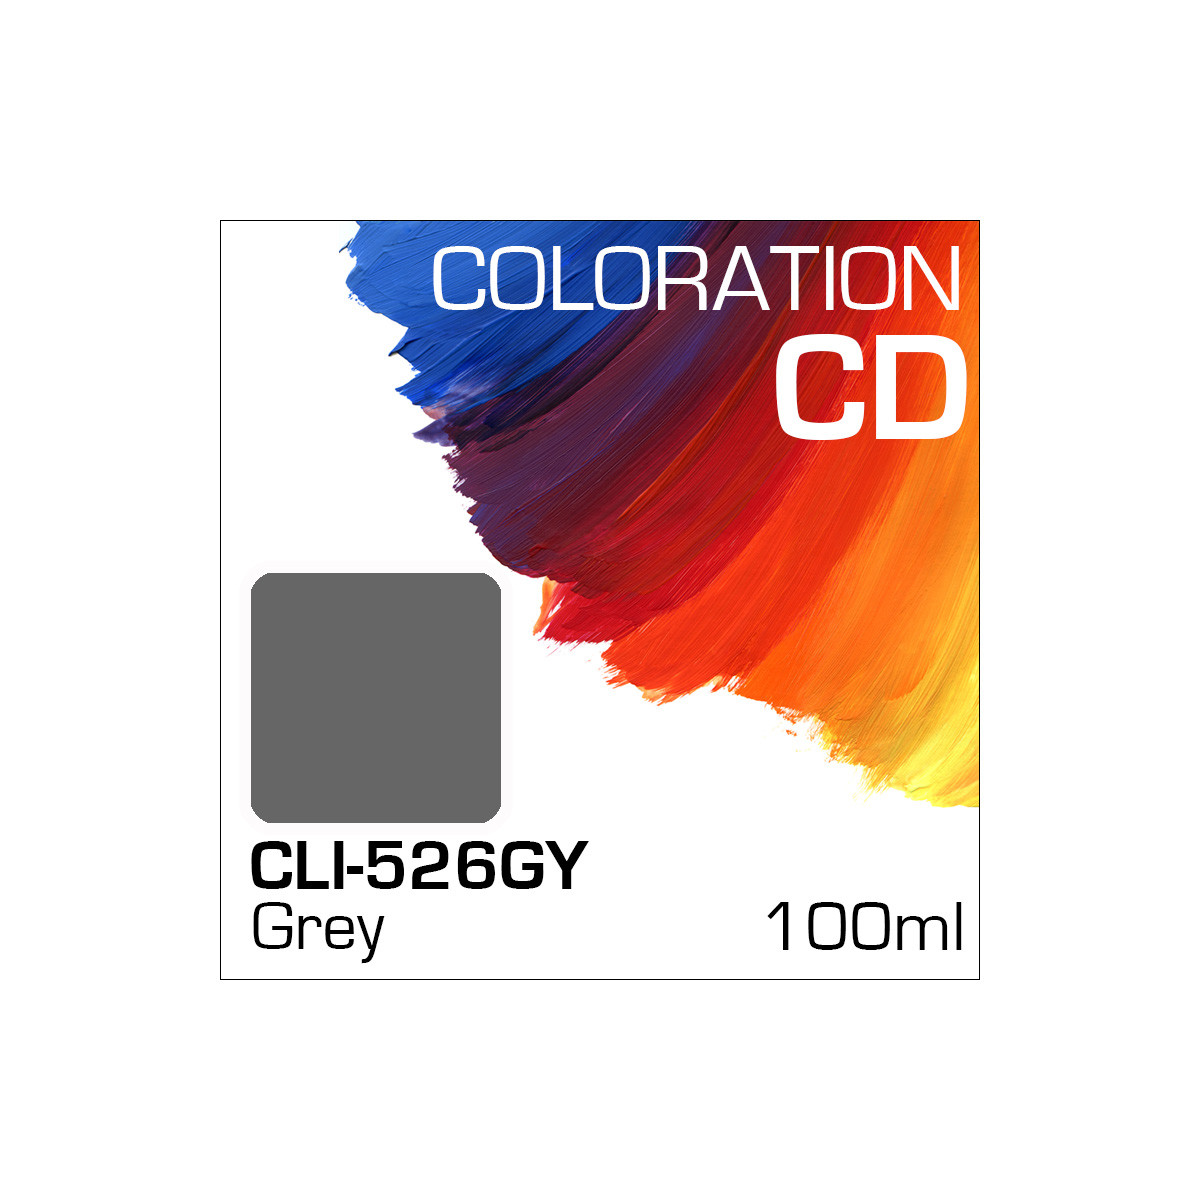 Coloration CD Flasche 100ml CLI-526GY Grey